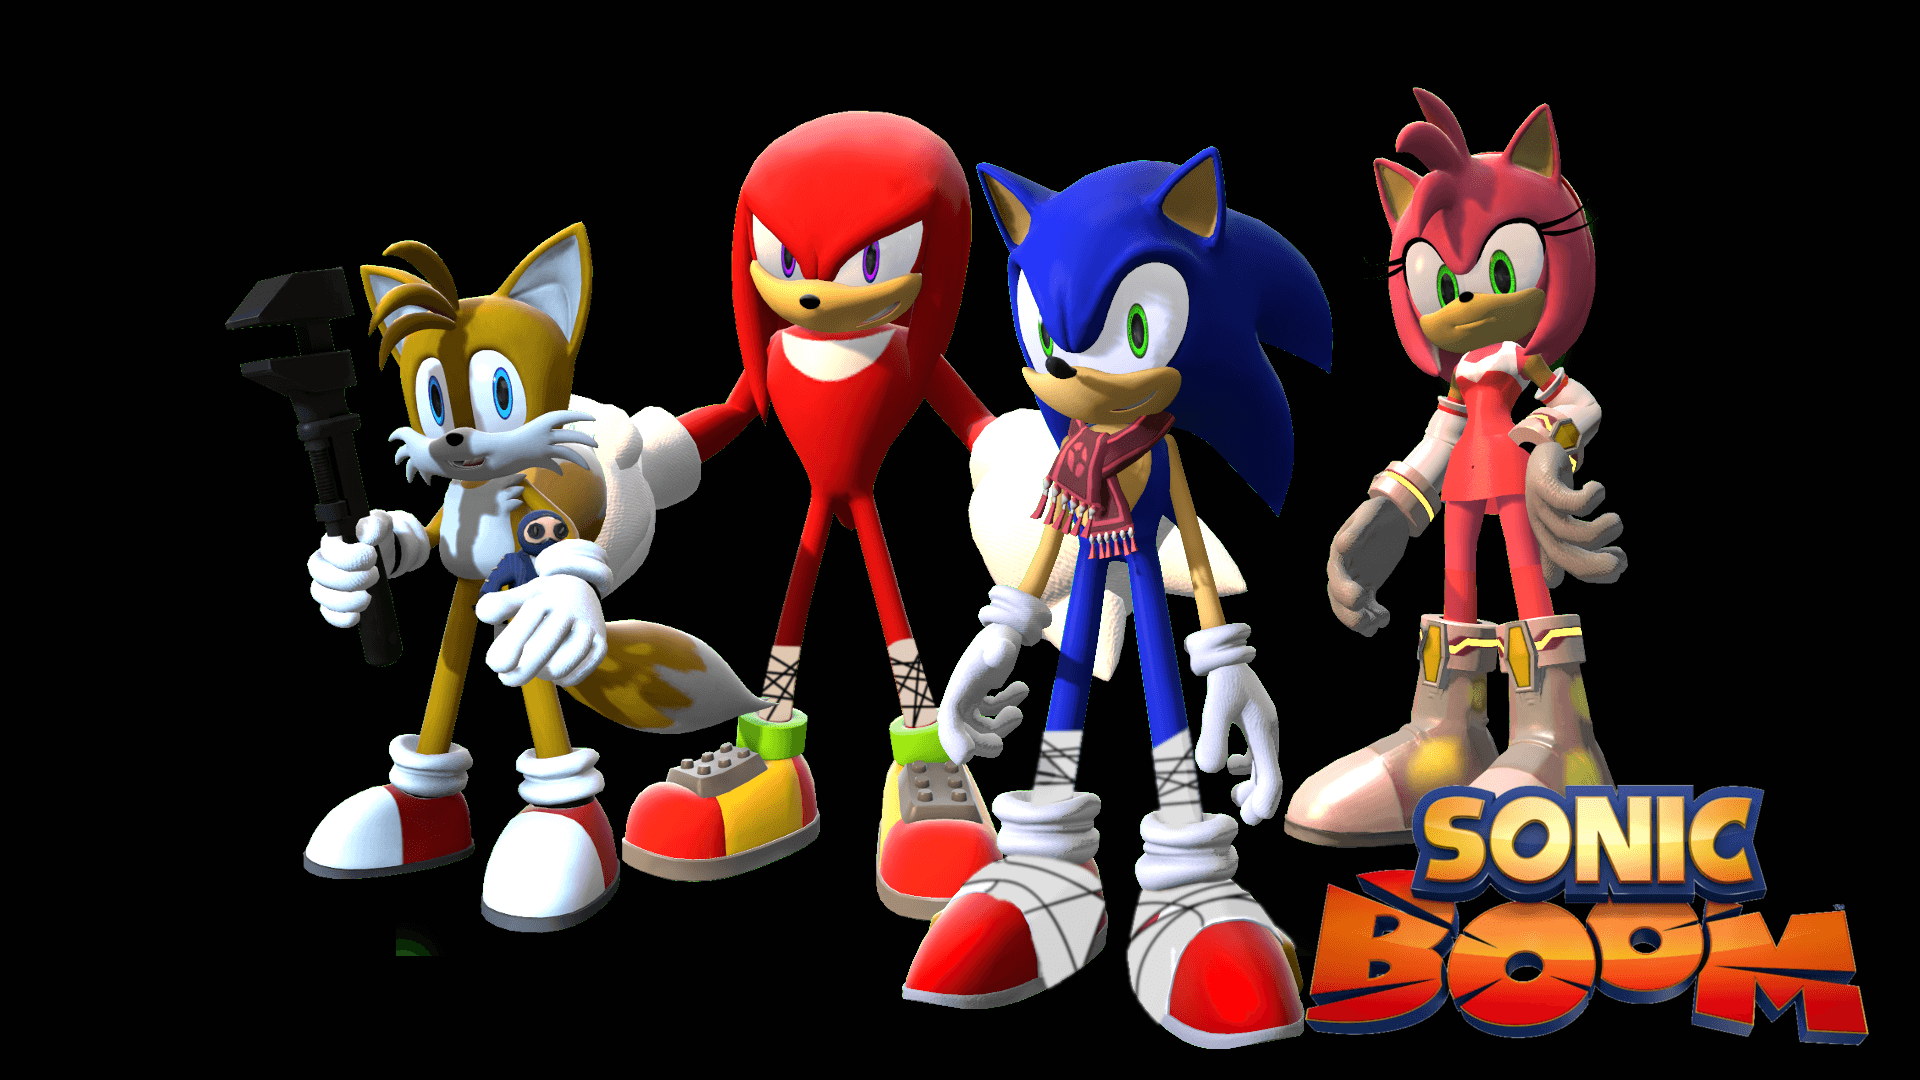 Sonic Boom HD Wallpapers and Backgrounds